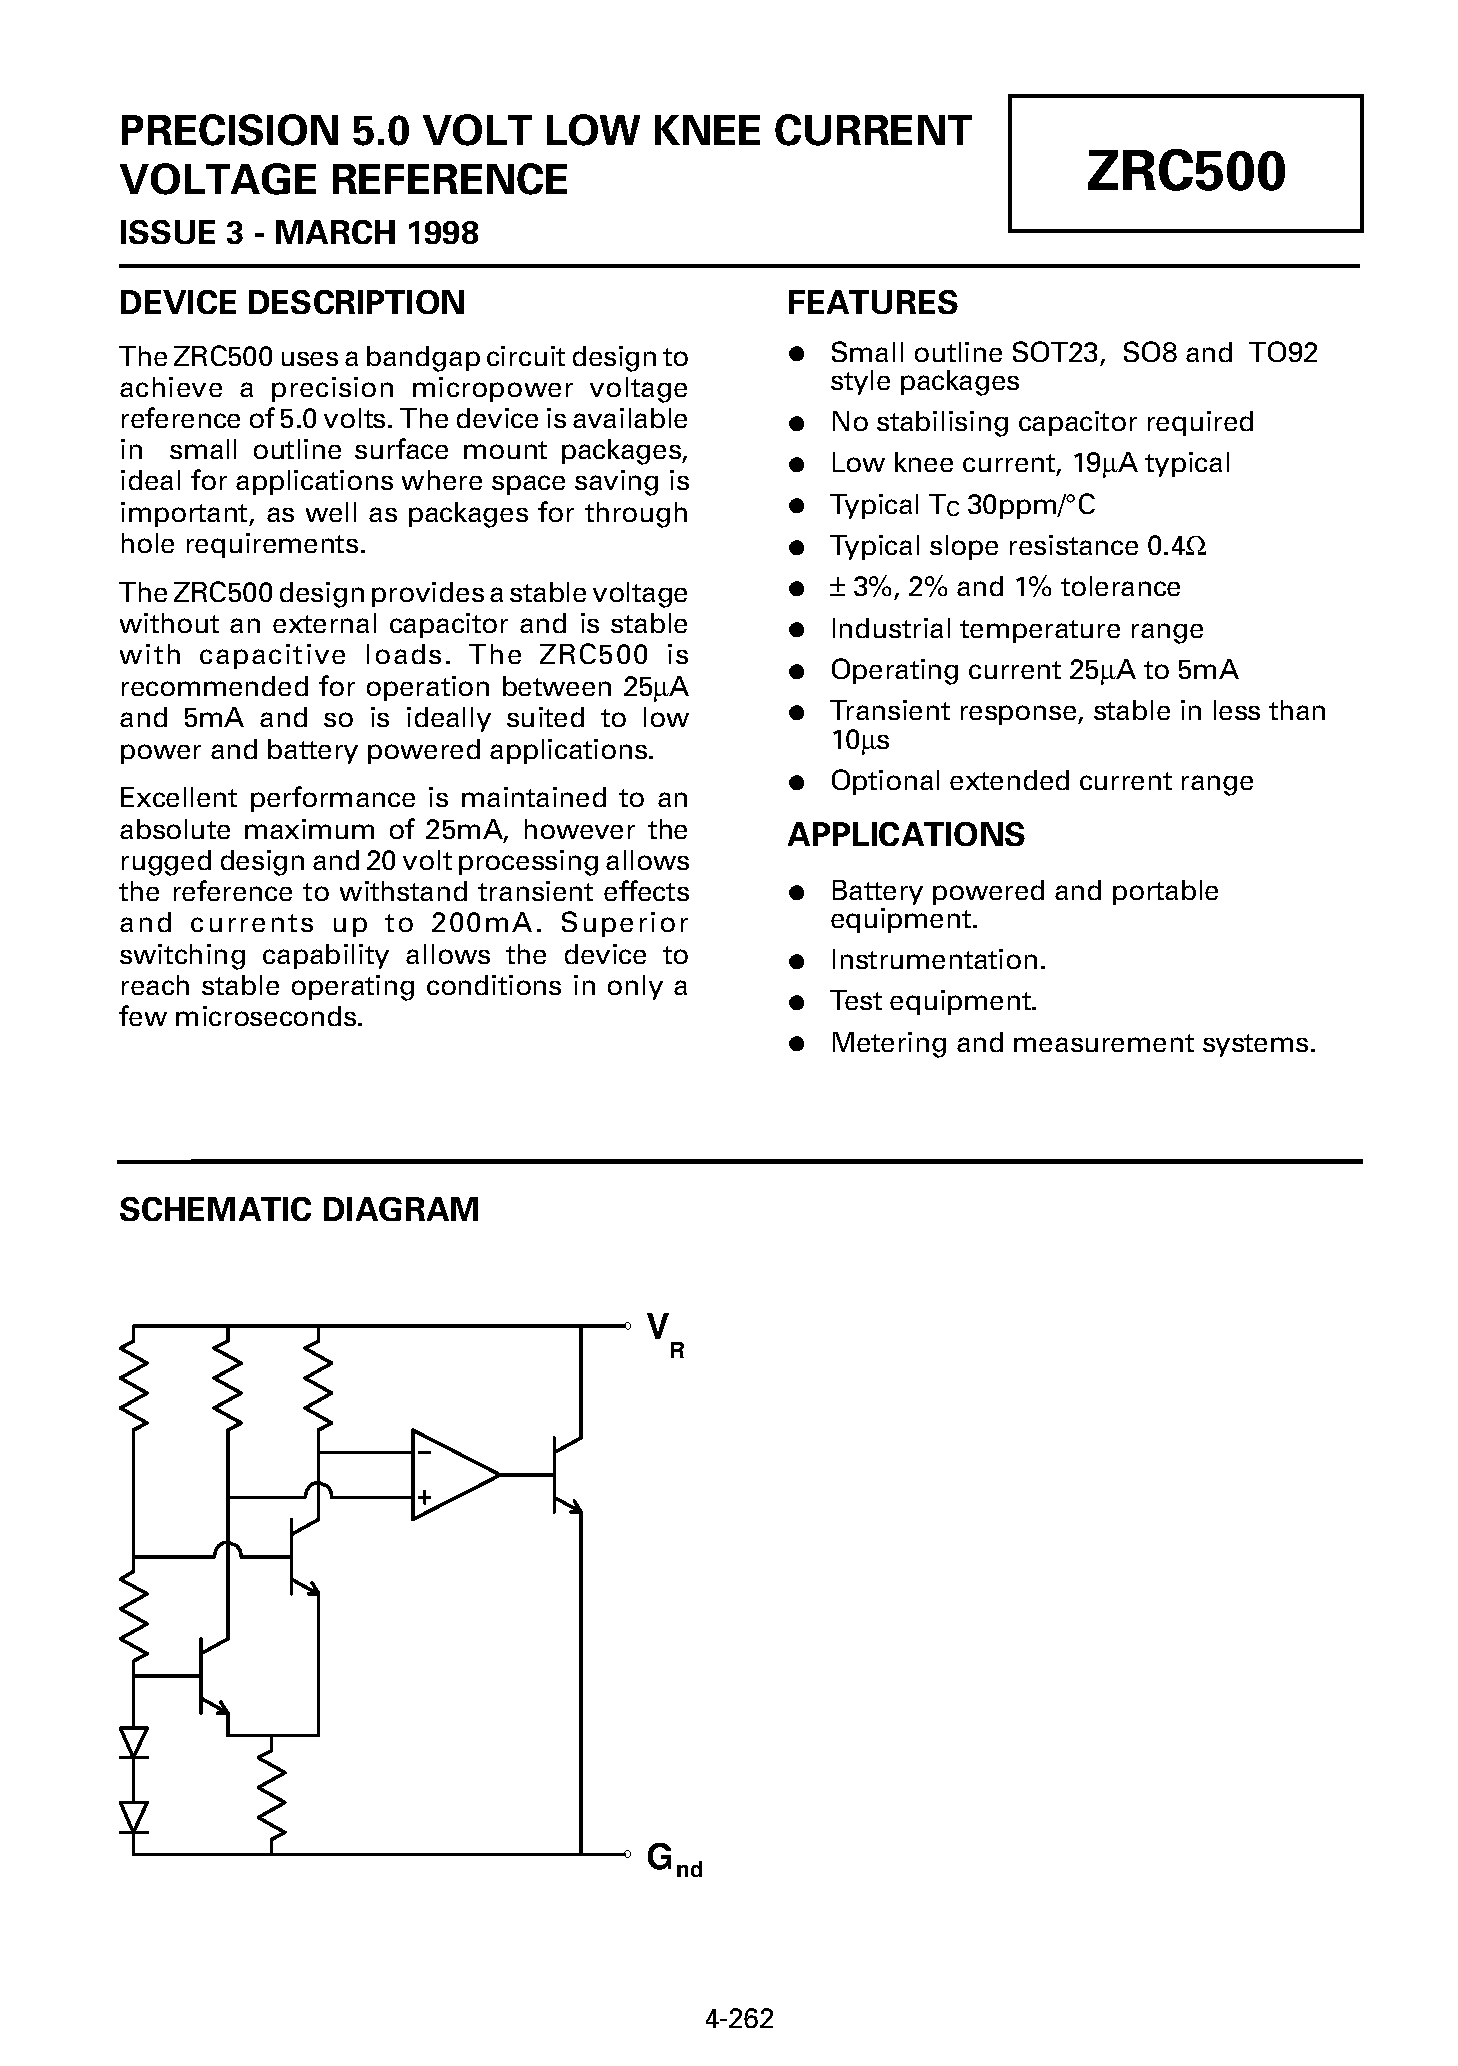 Datasheet ZRC500A03 - PRECISION 5.0 VOLT LOW KNEE CURRENT VOLTAGE REFERENCE page 1